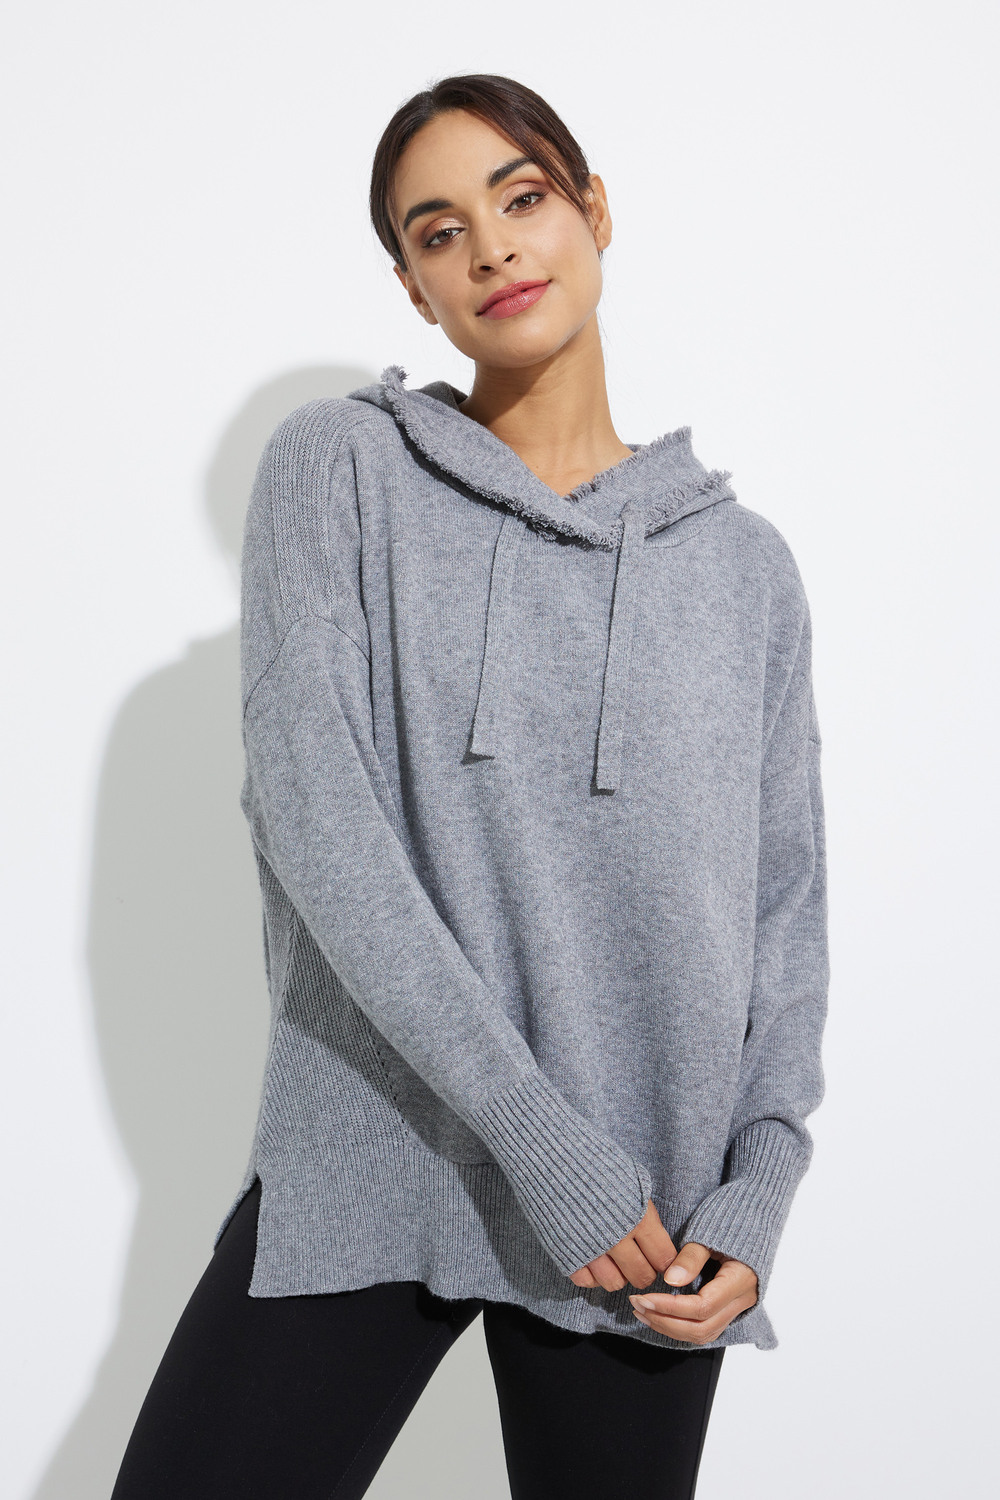 Hooded Sweater With Side Details Style C2416. Heather Grey